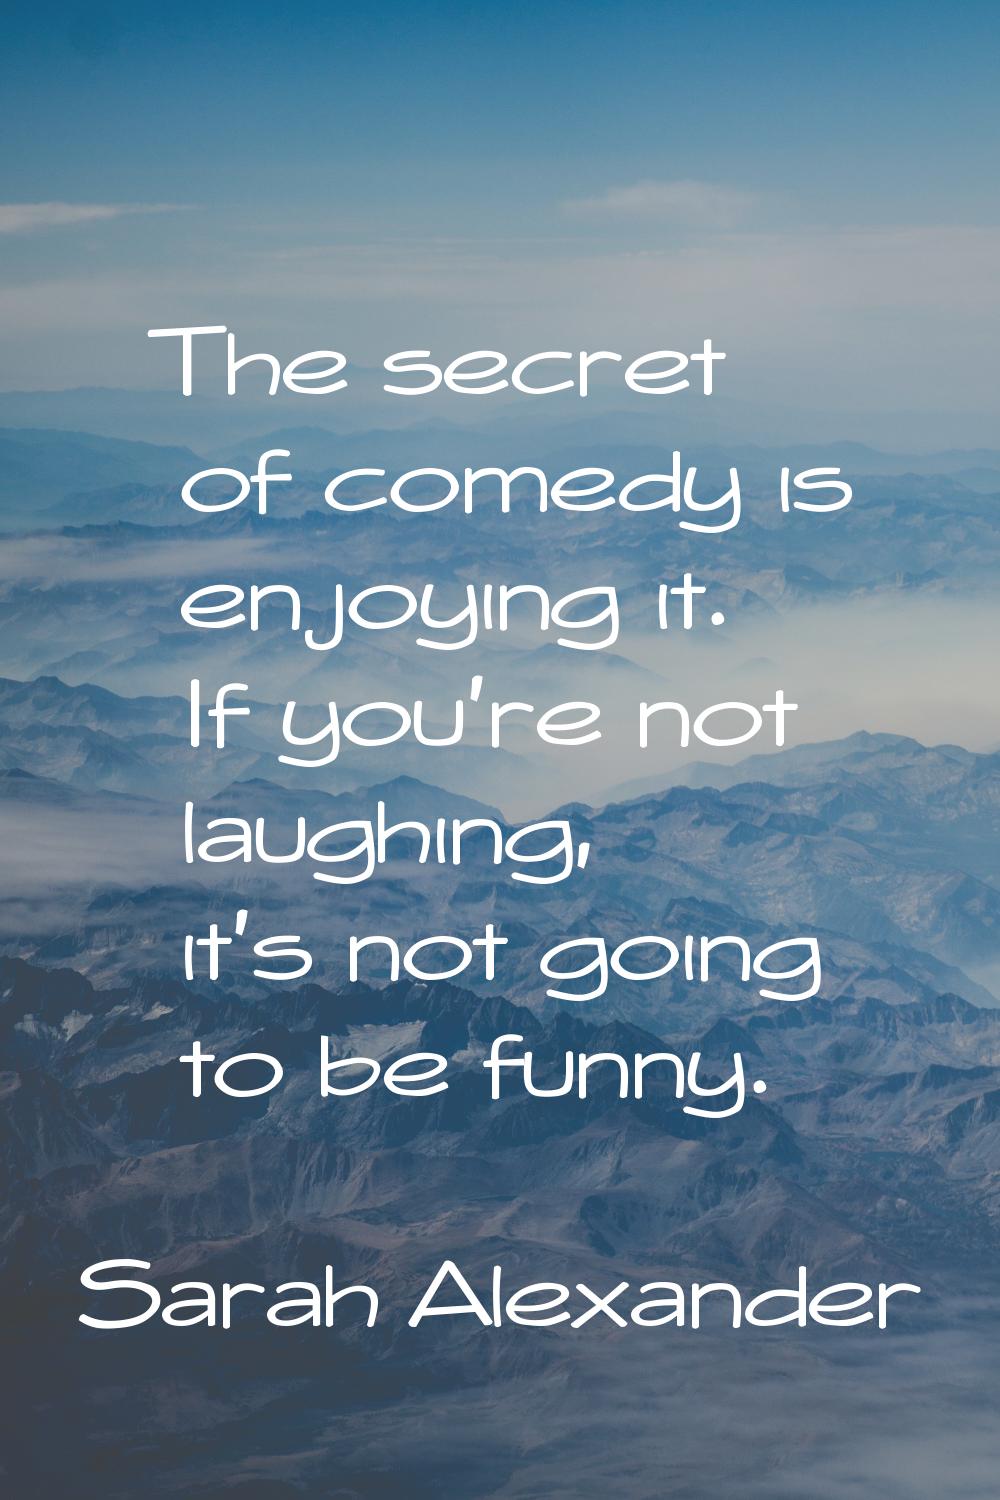 The secret of comedy is enjoying it. If you're not laughing, it's not going to be funny.